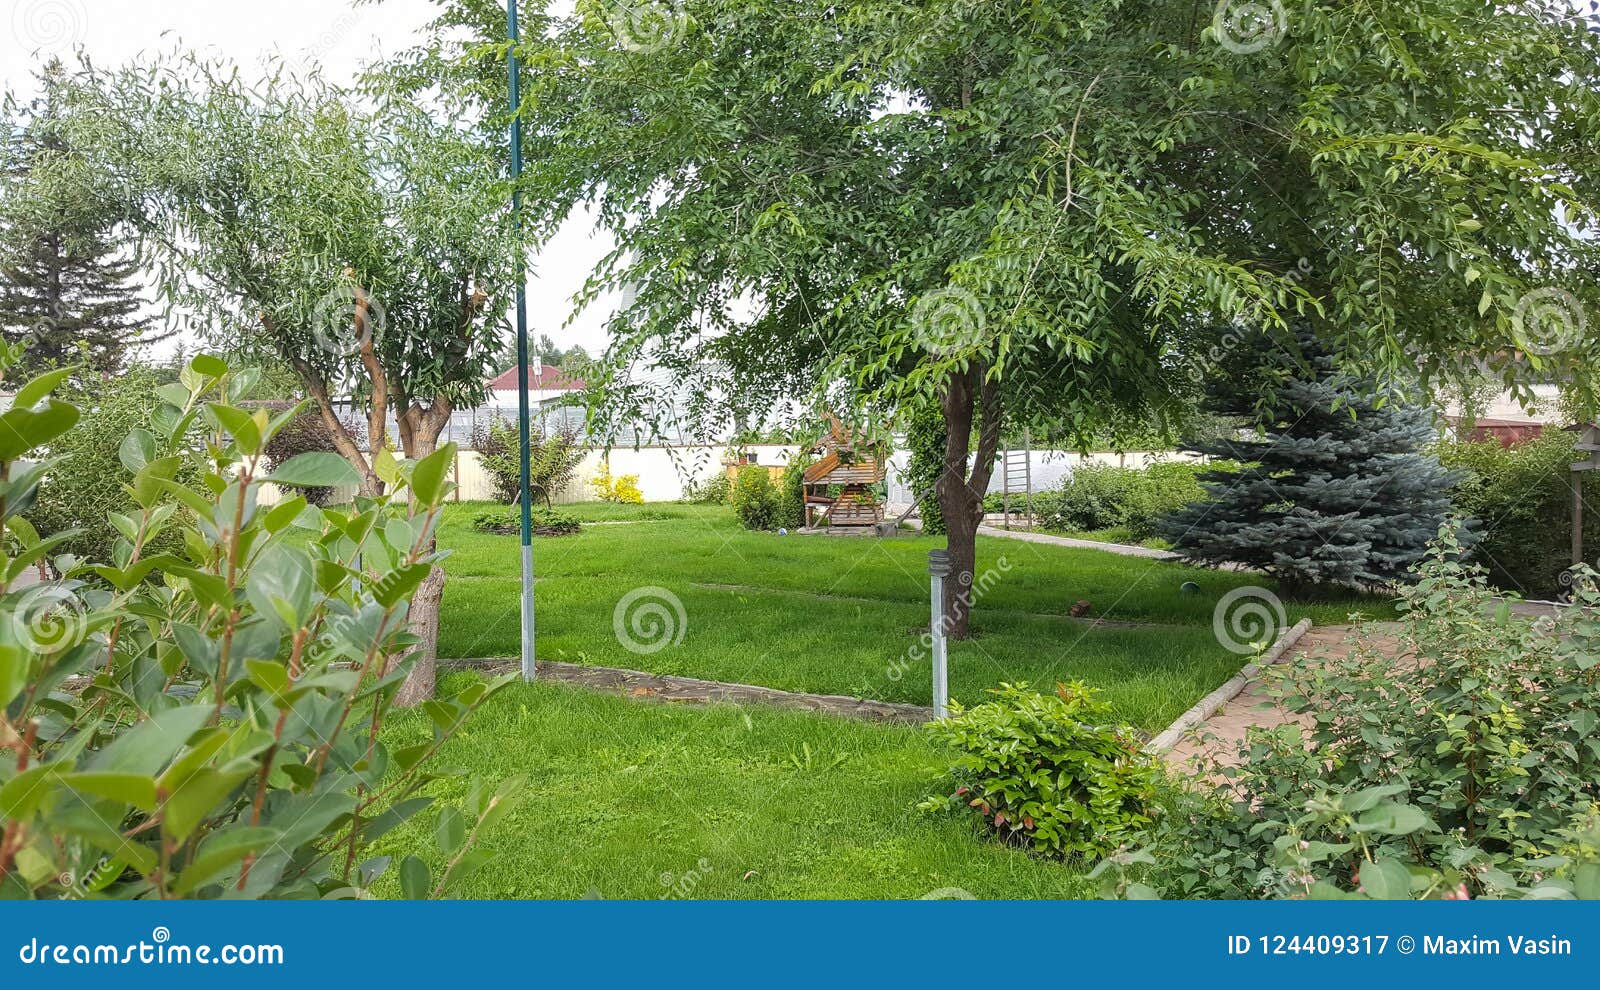 Country Cottage Area Landscaping Stock Image Image Of Deck